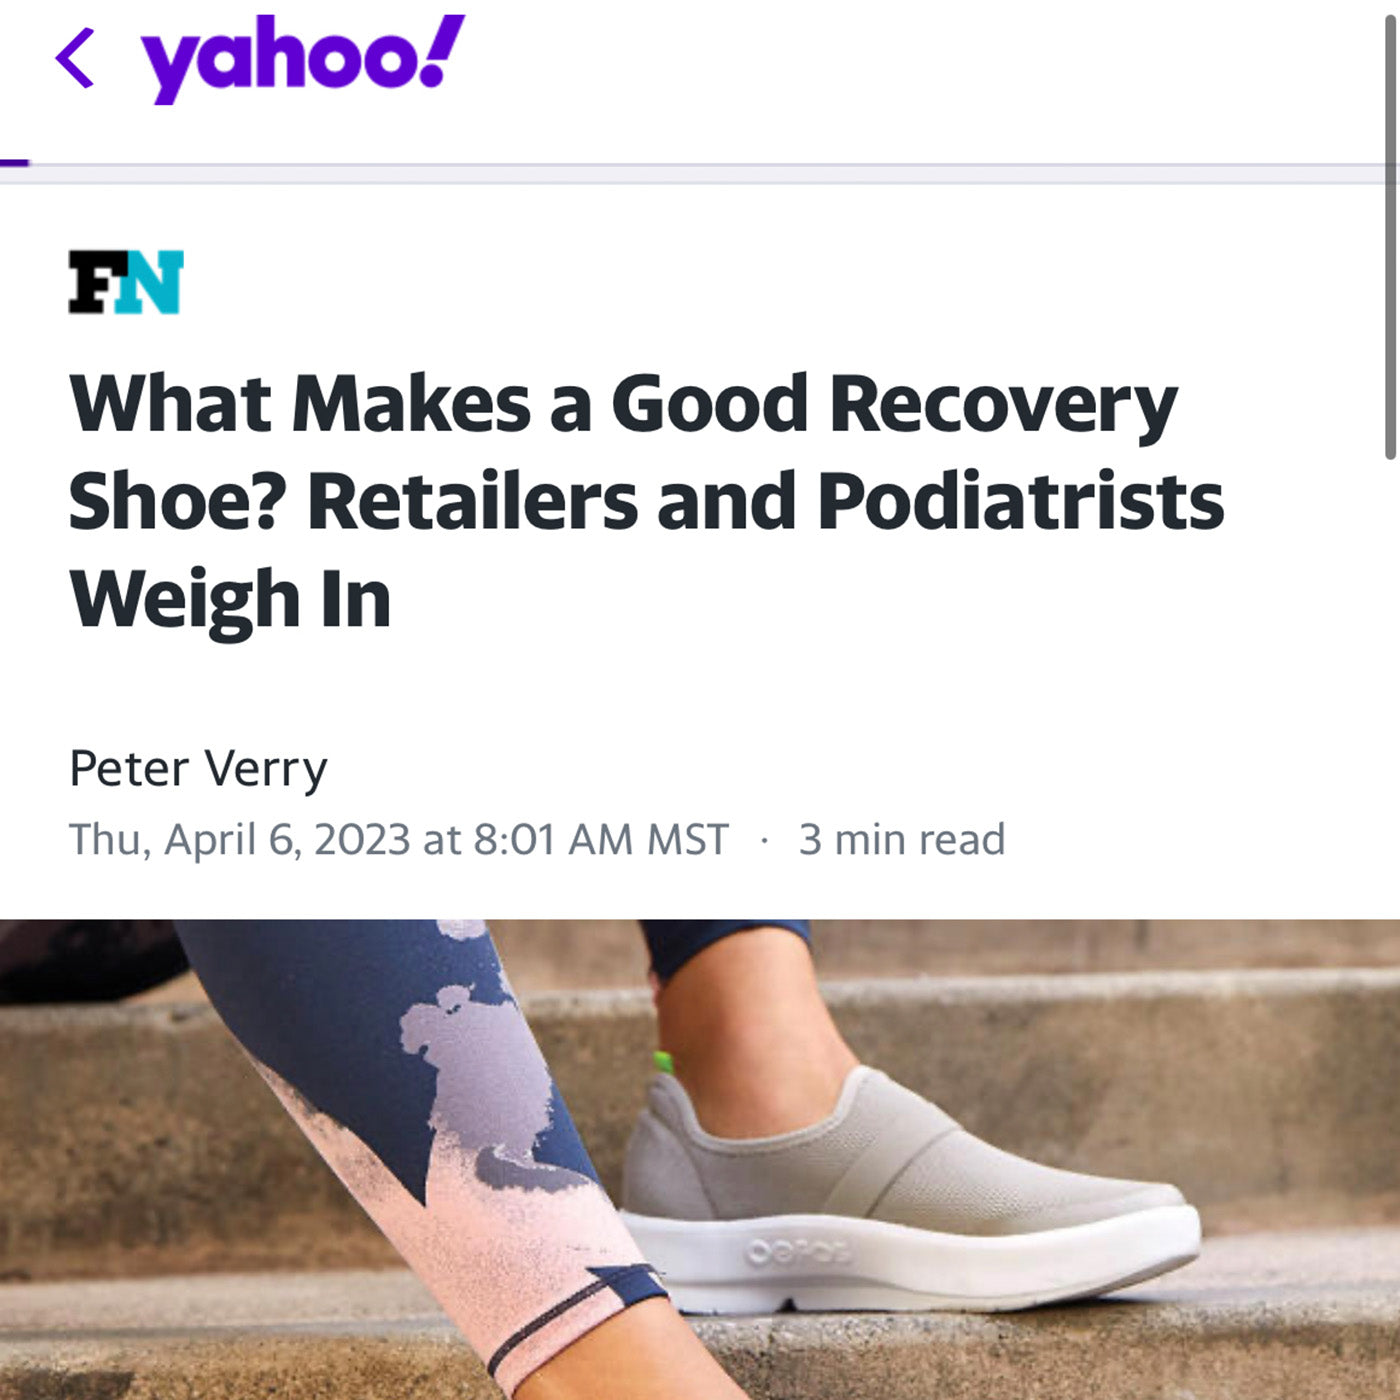 Yahoo - What Makes a Good Recovery Shoes